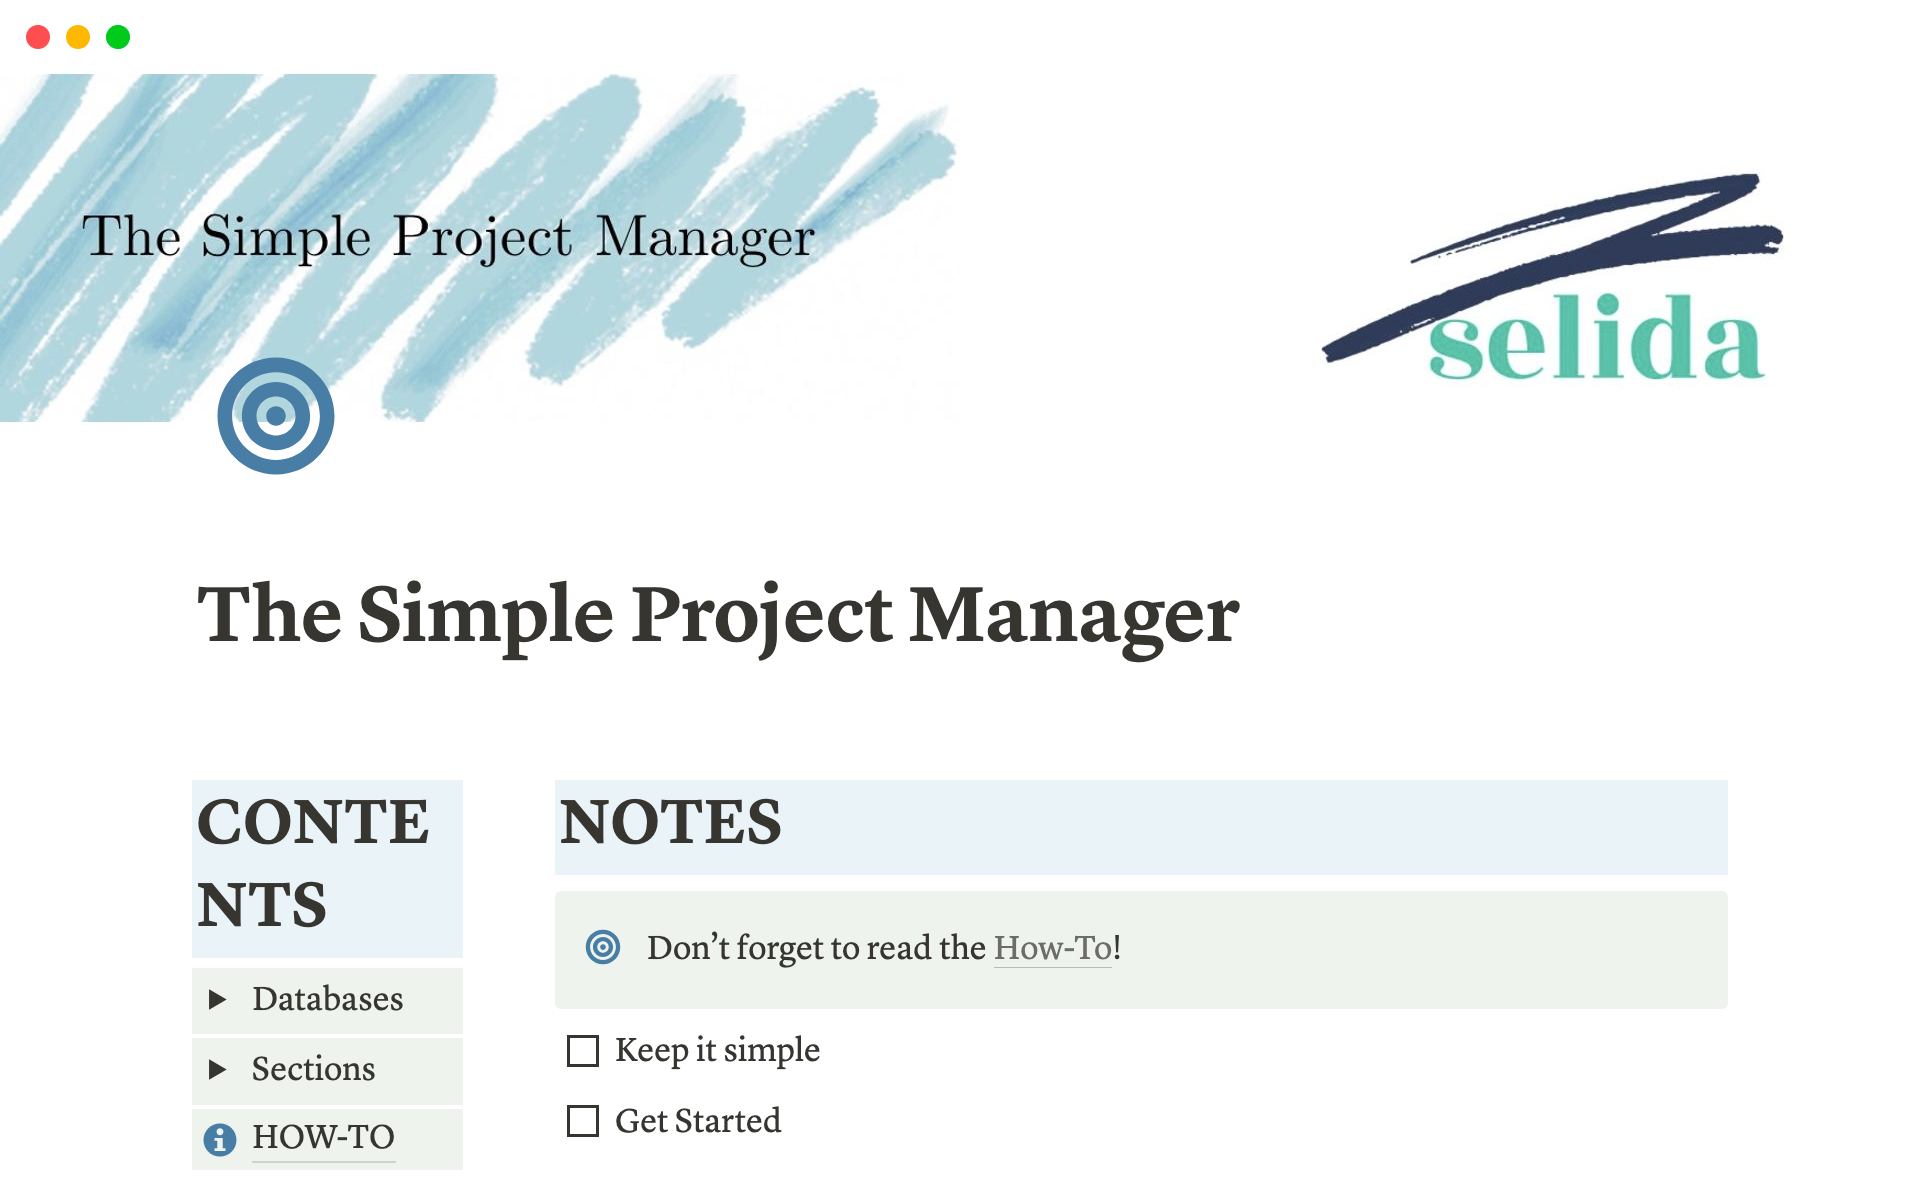 The Simple Project Manager is a stripped back way to manage projects, tasks and sub-tasks using Notion.